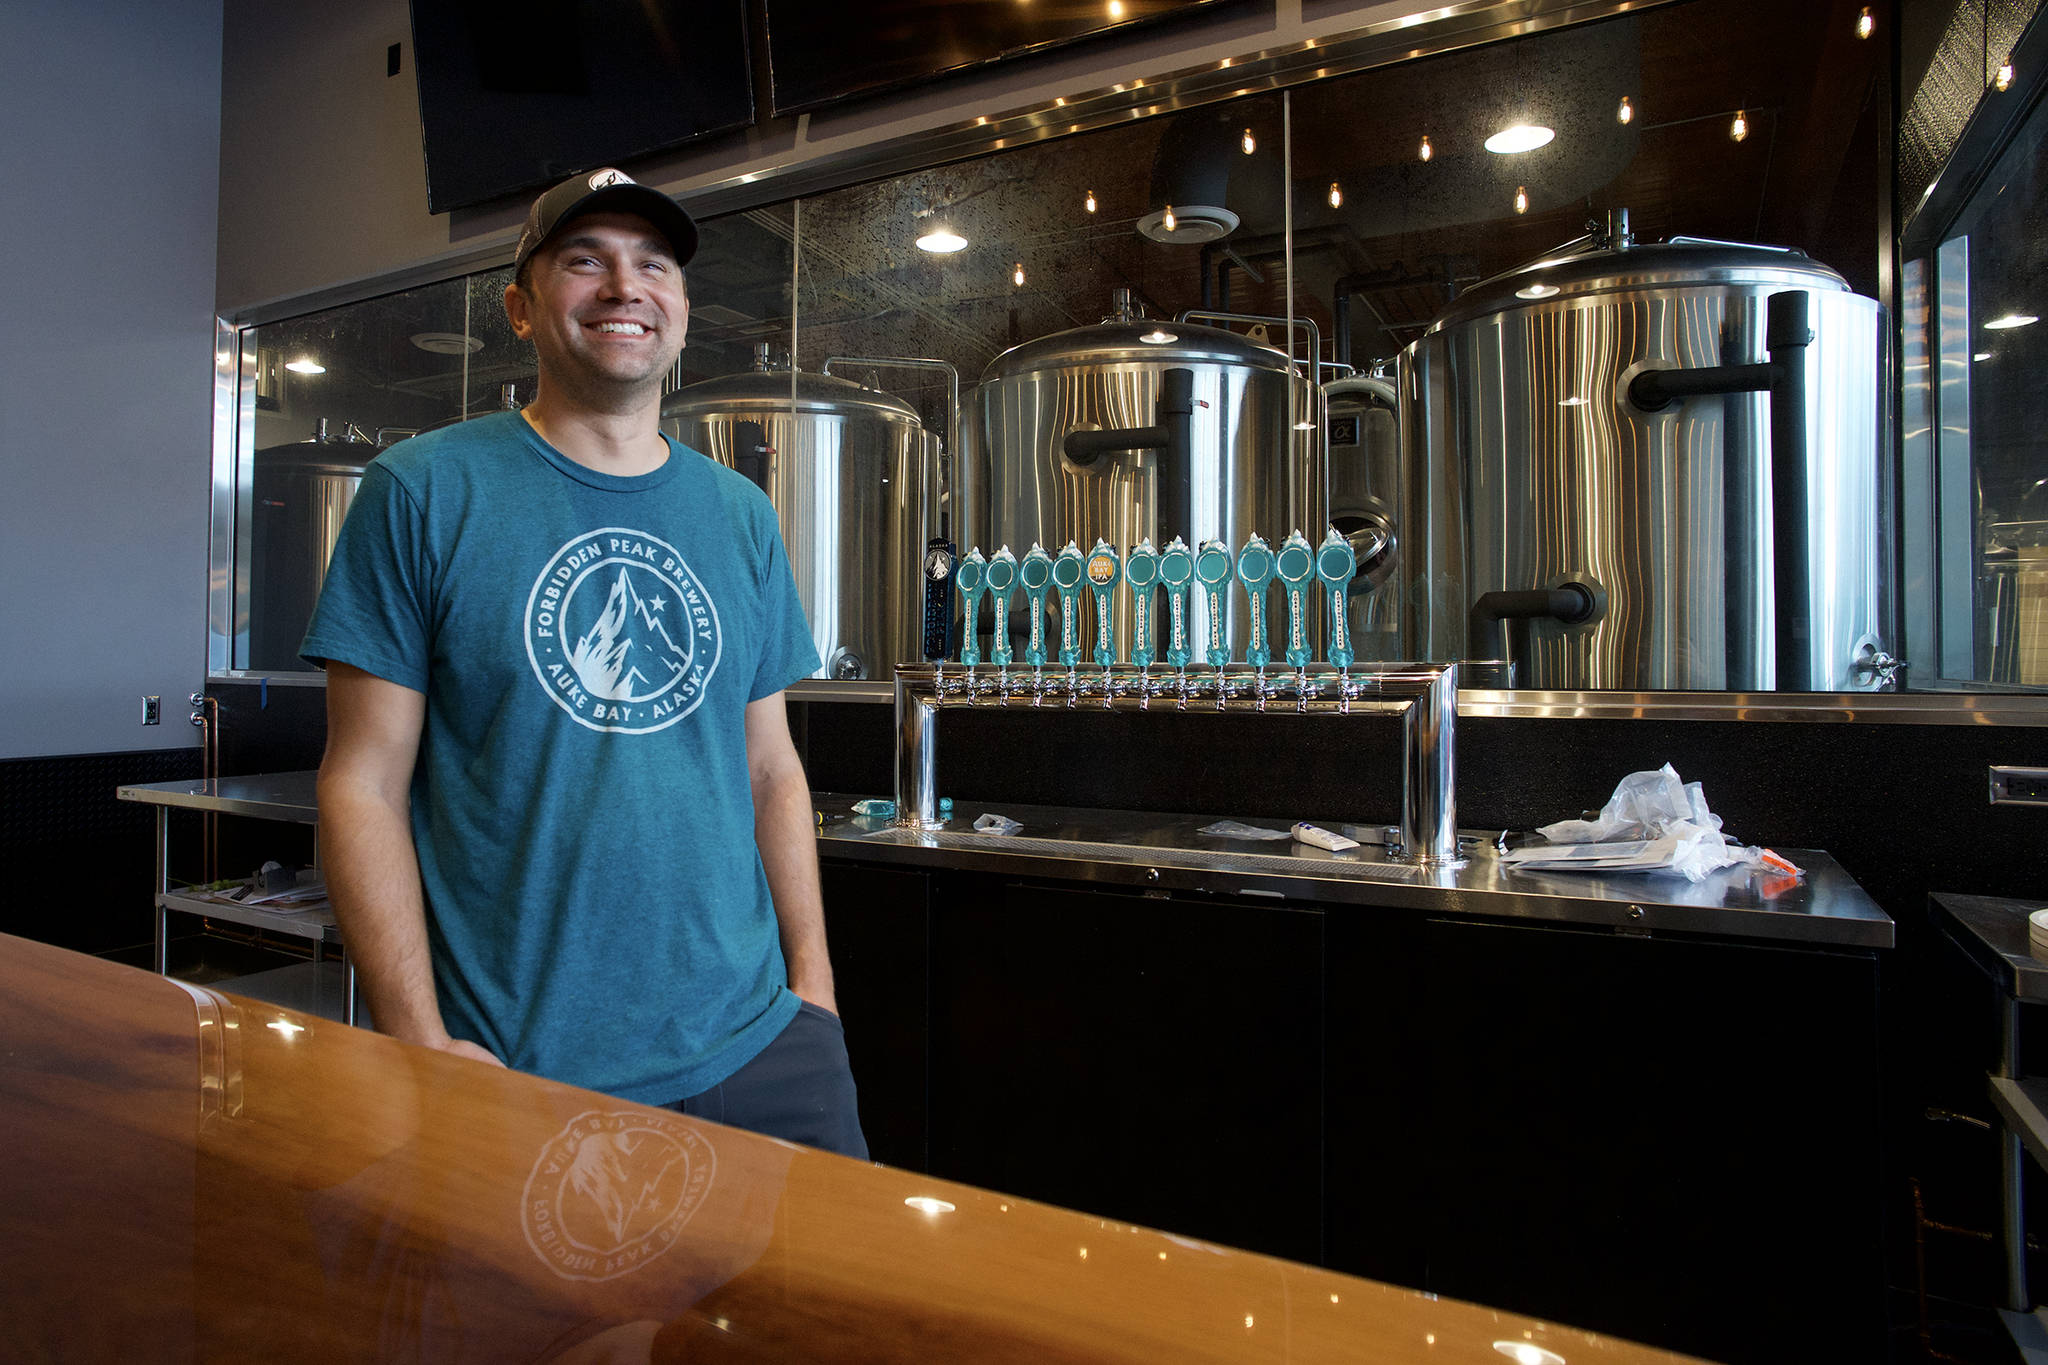 Co-owner Skye Stekoll stands behind a new bar as the Forbidden Peak Brewery nears completion on Thursday, Oct. 3, 2019. The Auke Bay brewery opens Saturday, Oct. 12. (Michael Penn | Juneau Empire)